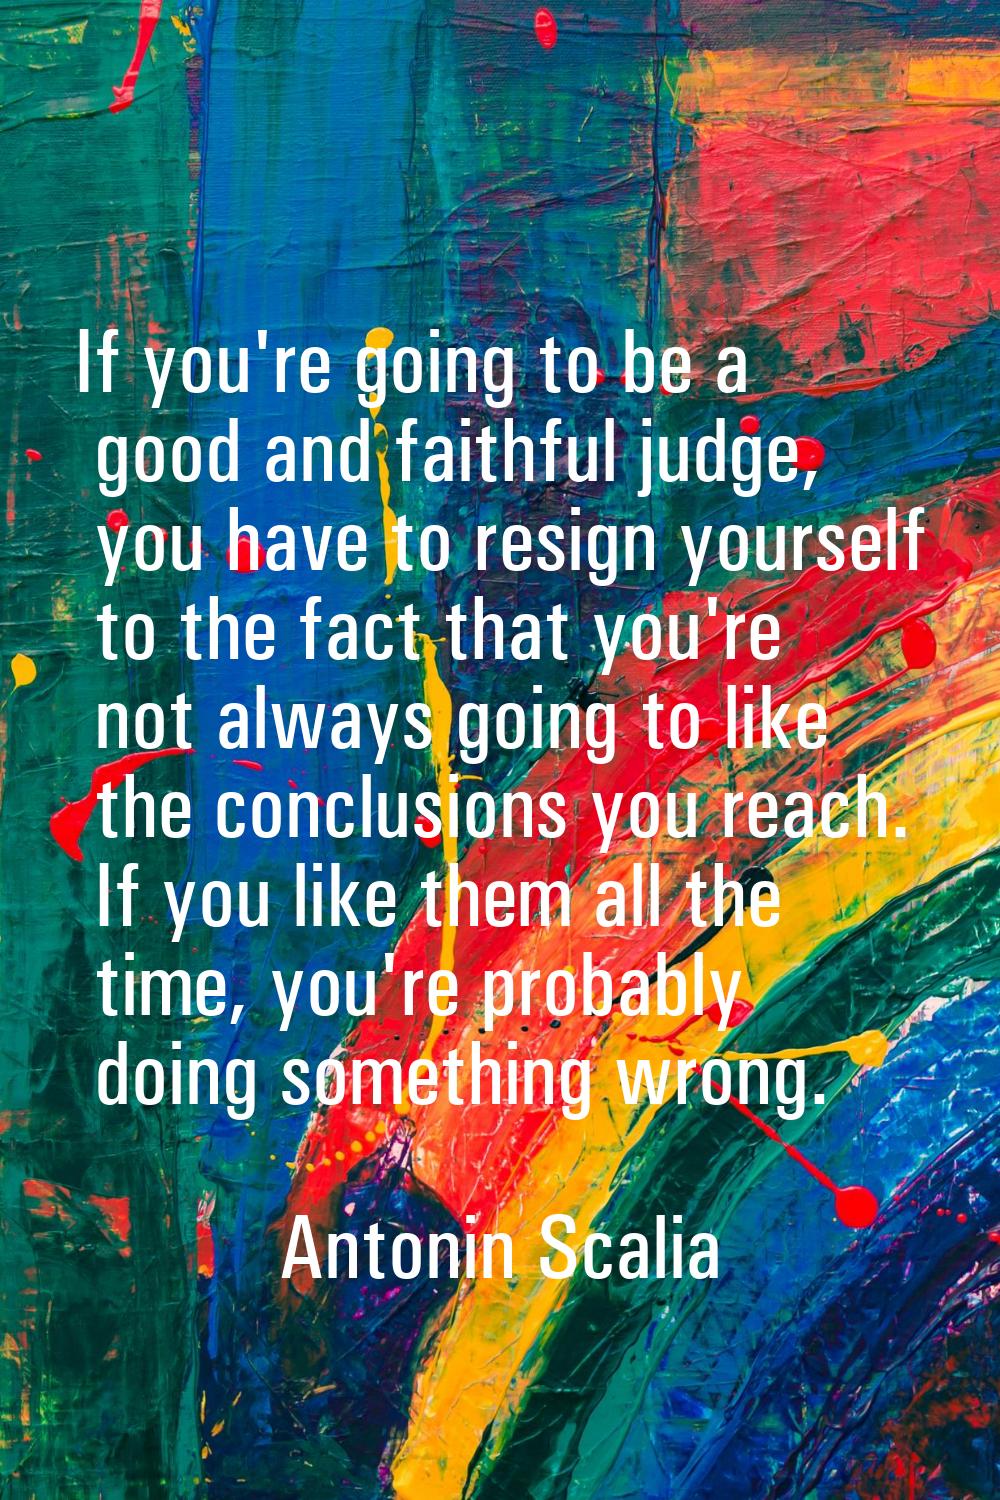 If you're going to be a good and faithful judge, you have to resign yourself to the fact that you'r